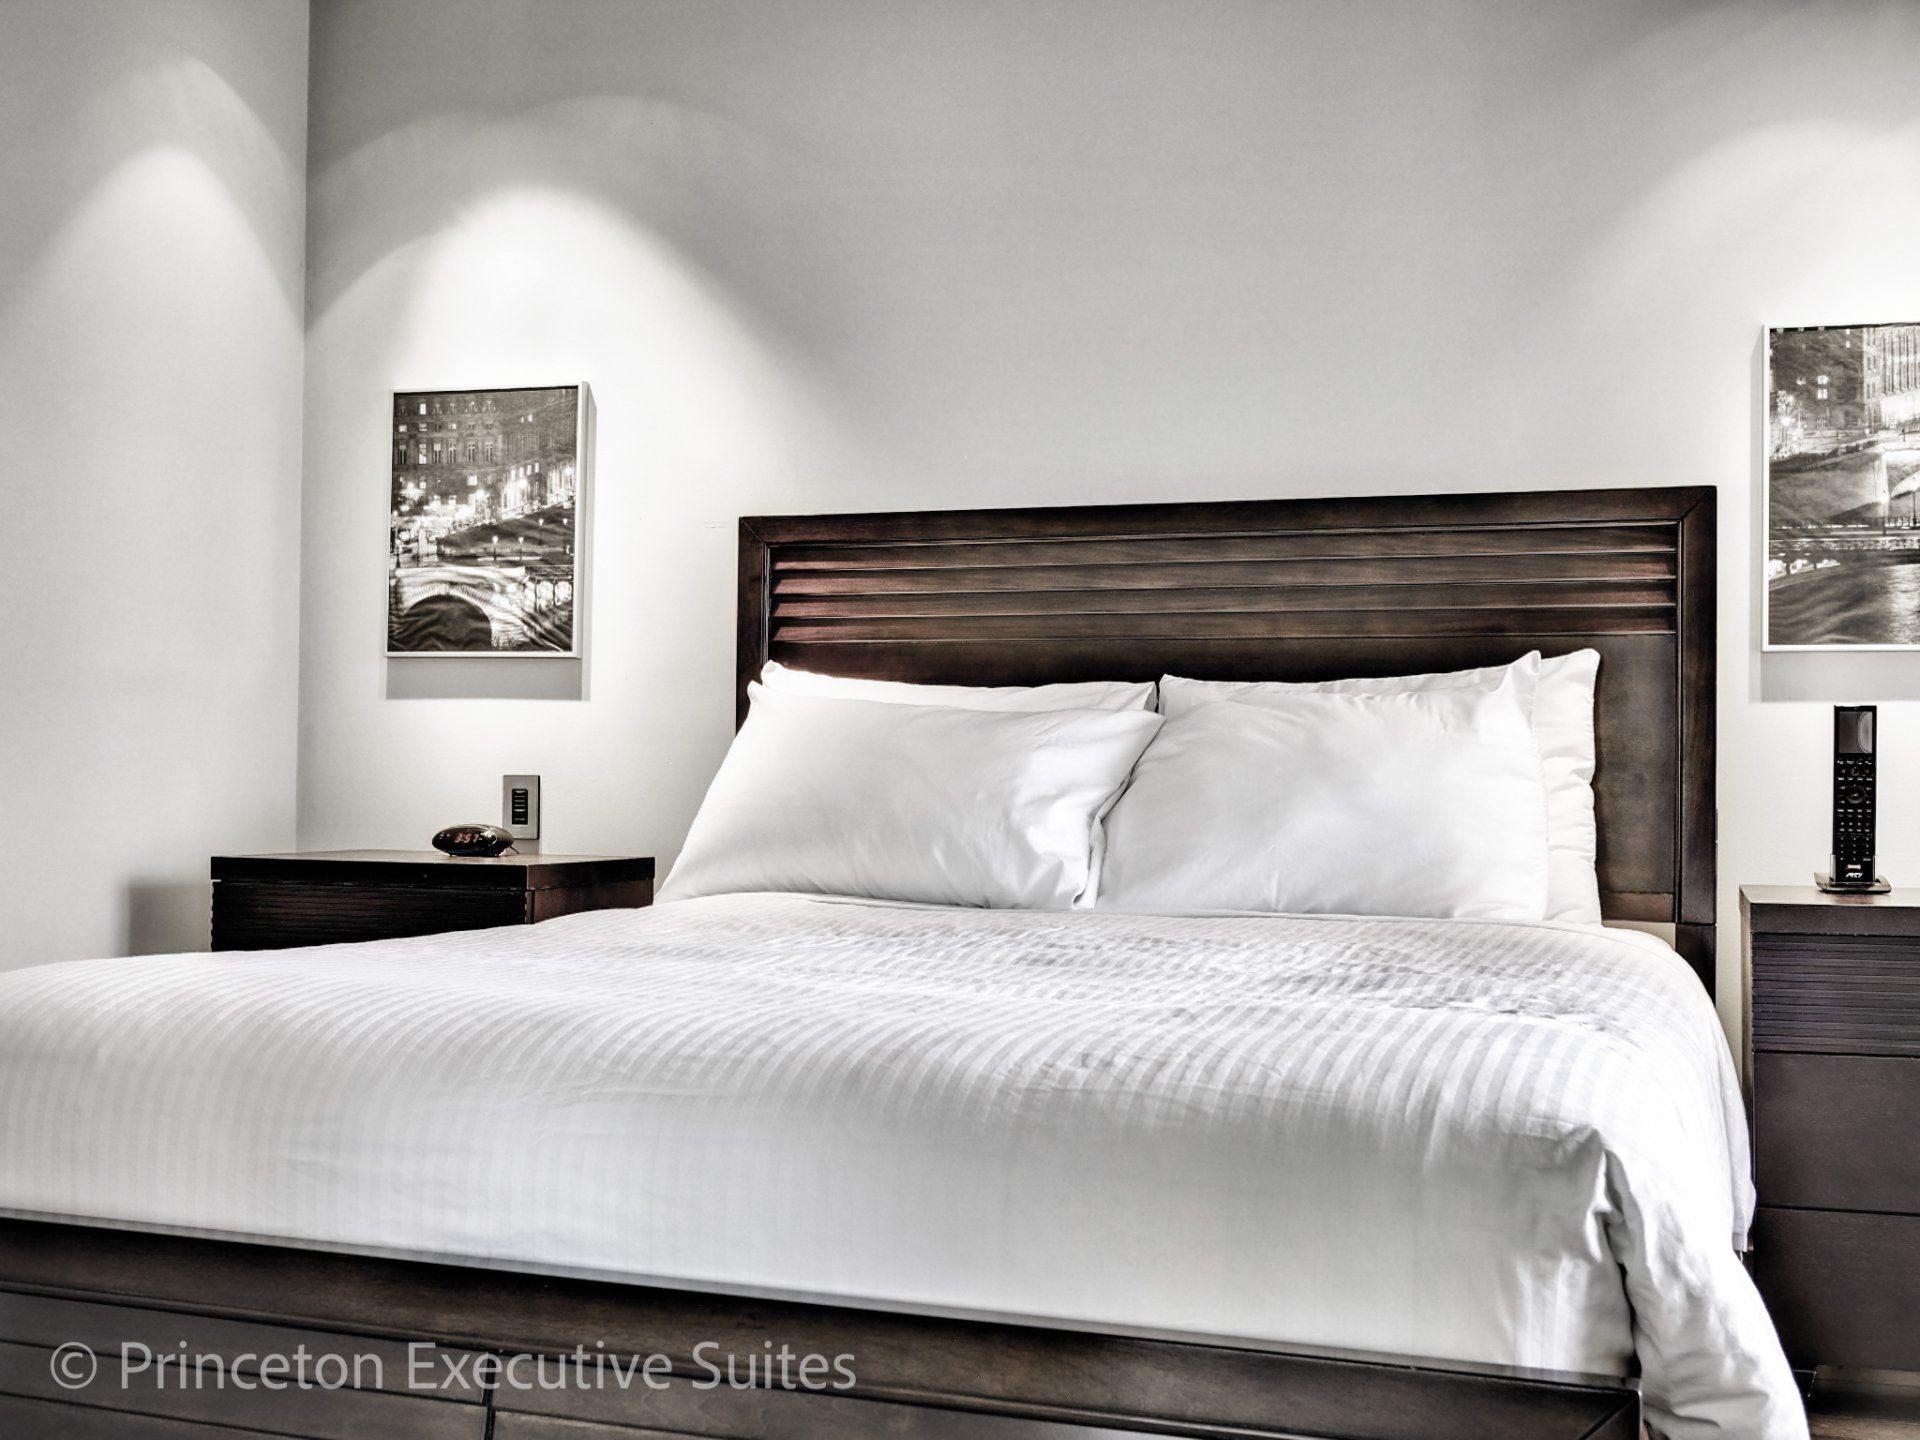 High thread count linens in a luxury Edmonton furnished suite